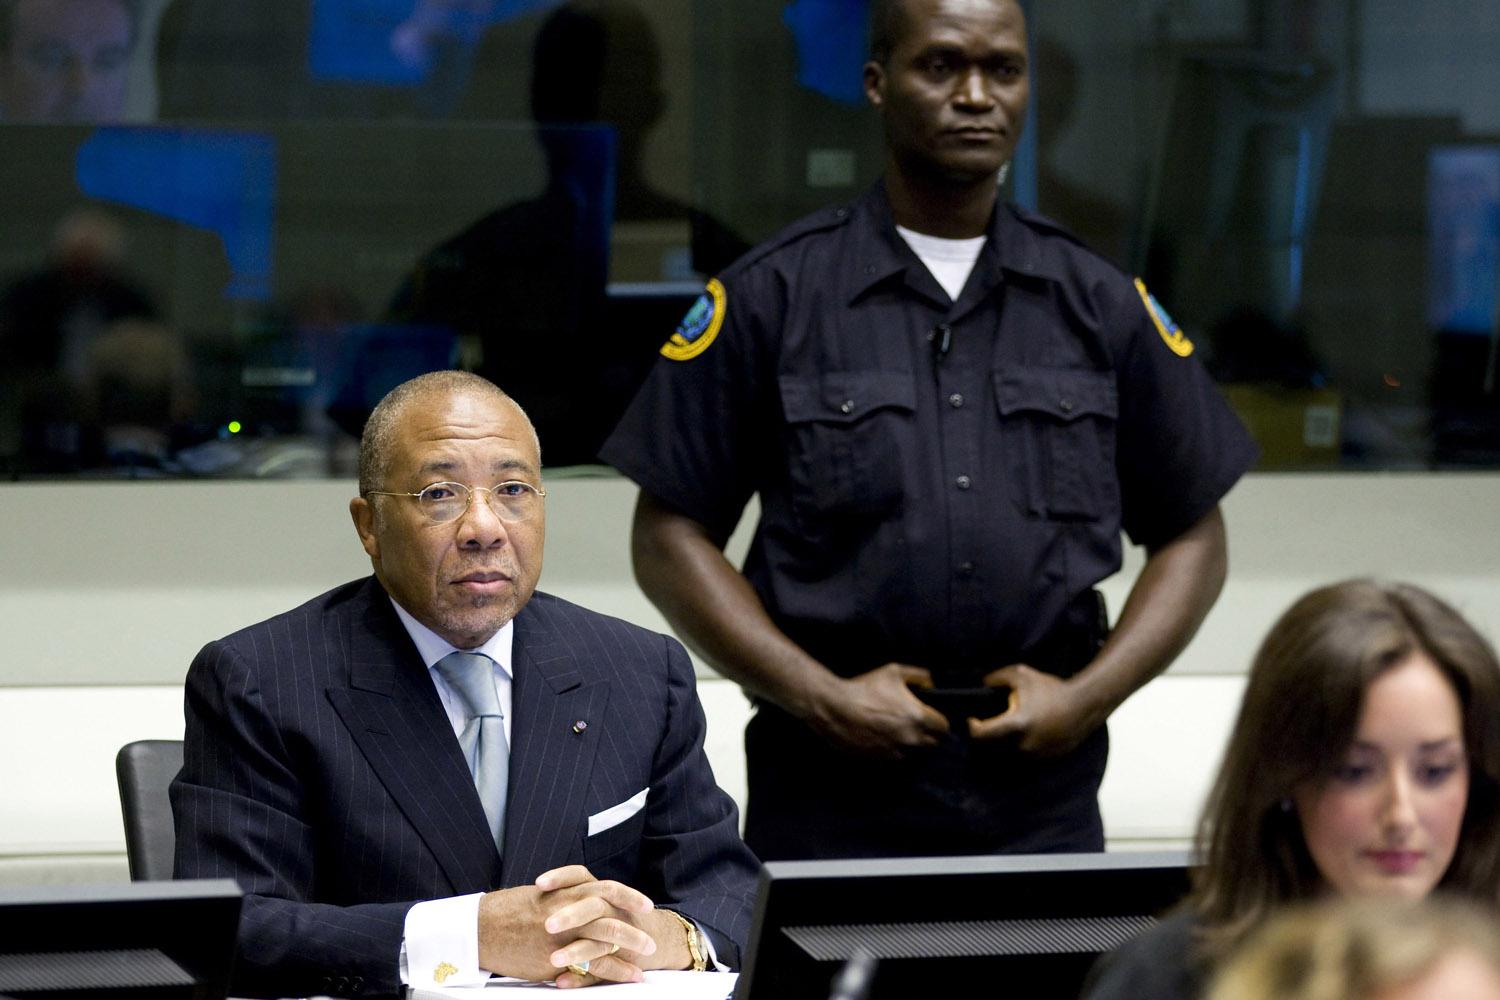 Charles Taylor sits at the defendant's table during his trial at the Special Court for Sierra Leone in The Hague, August 5, 2010.